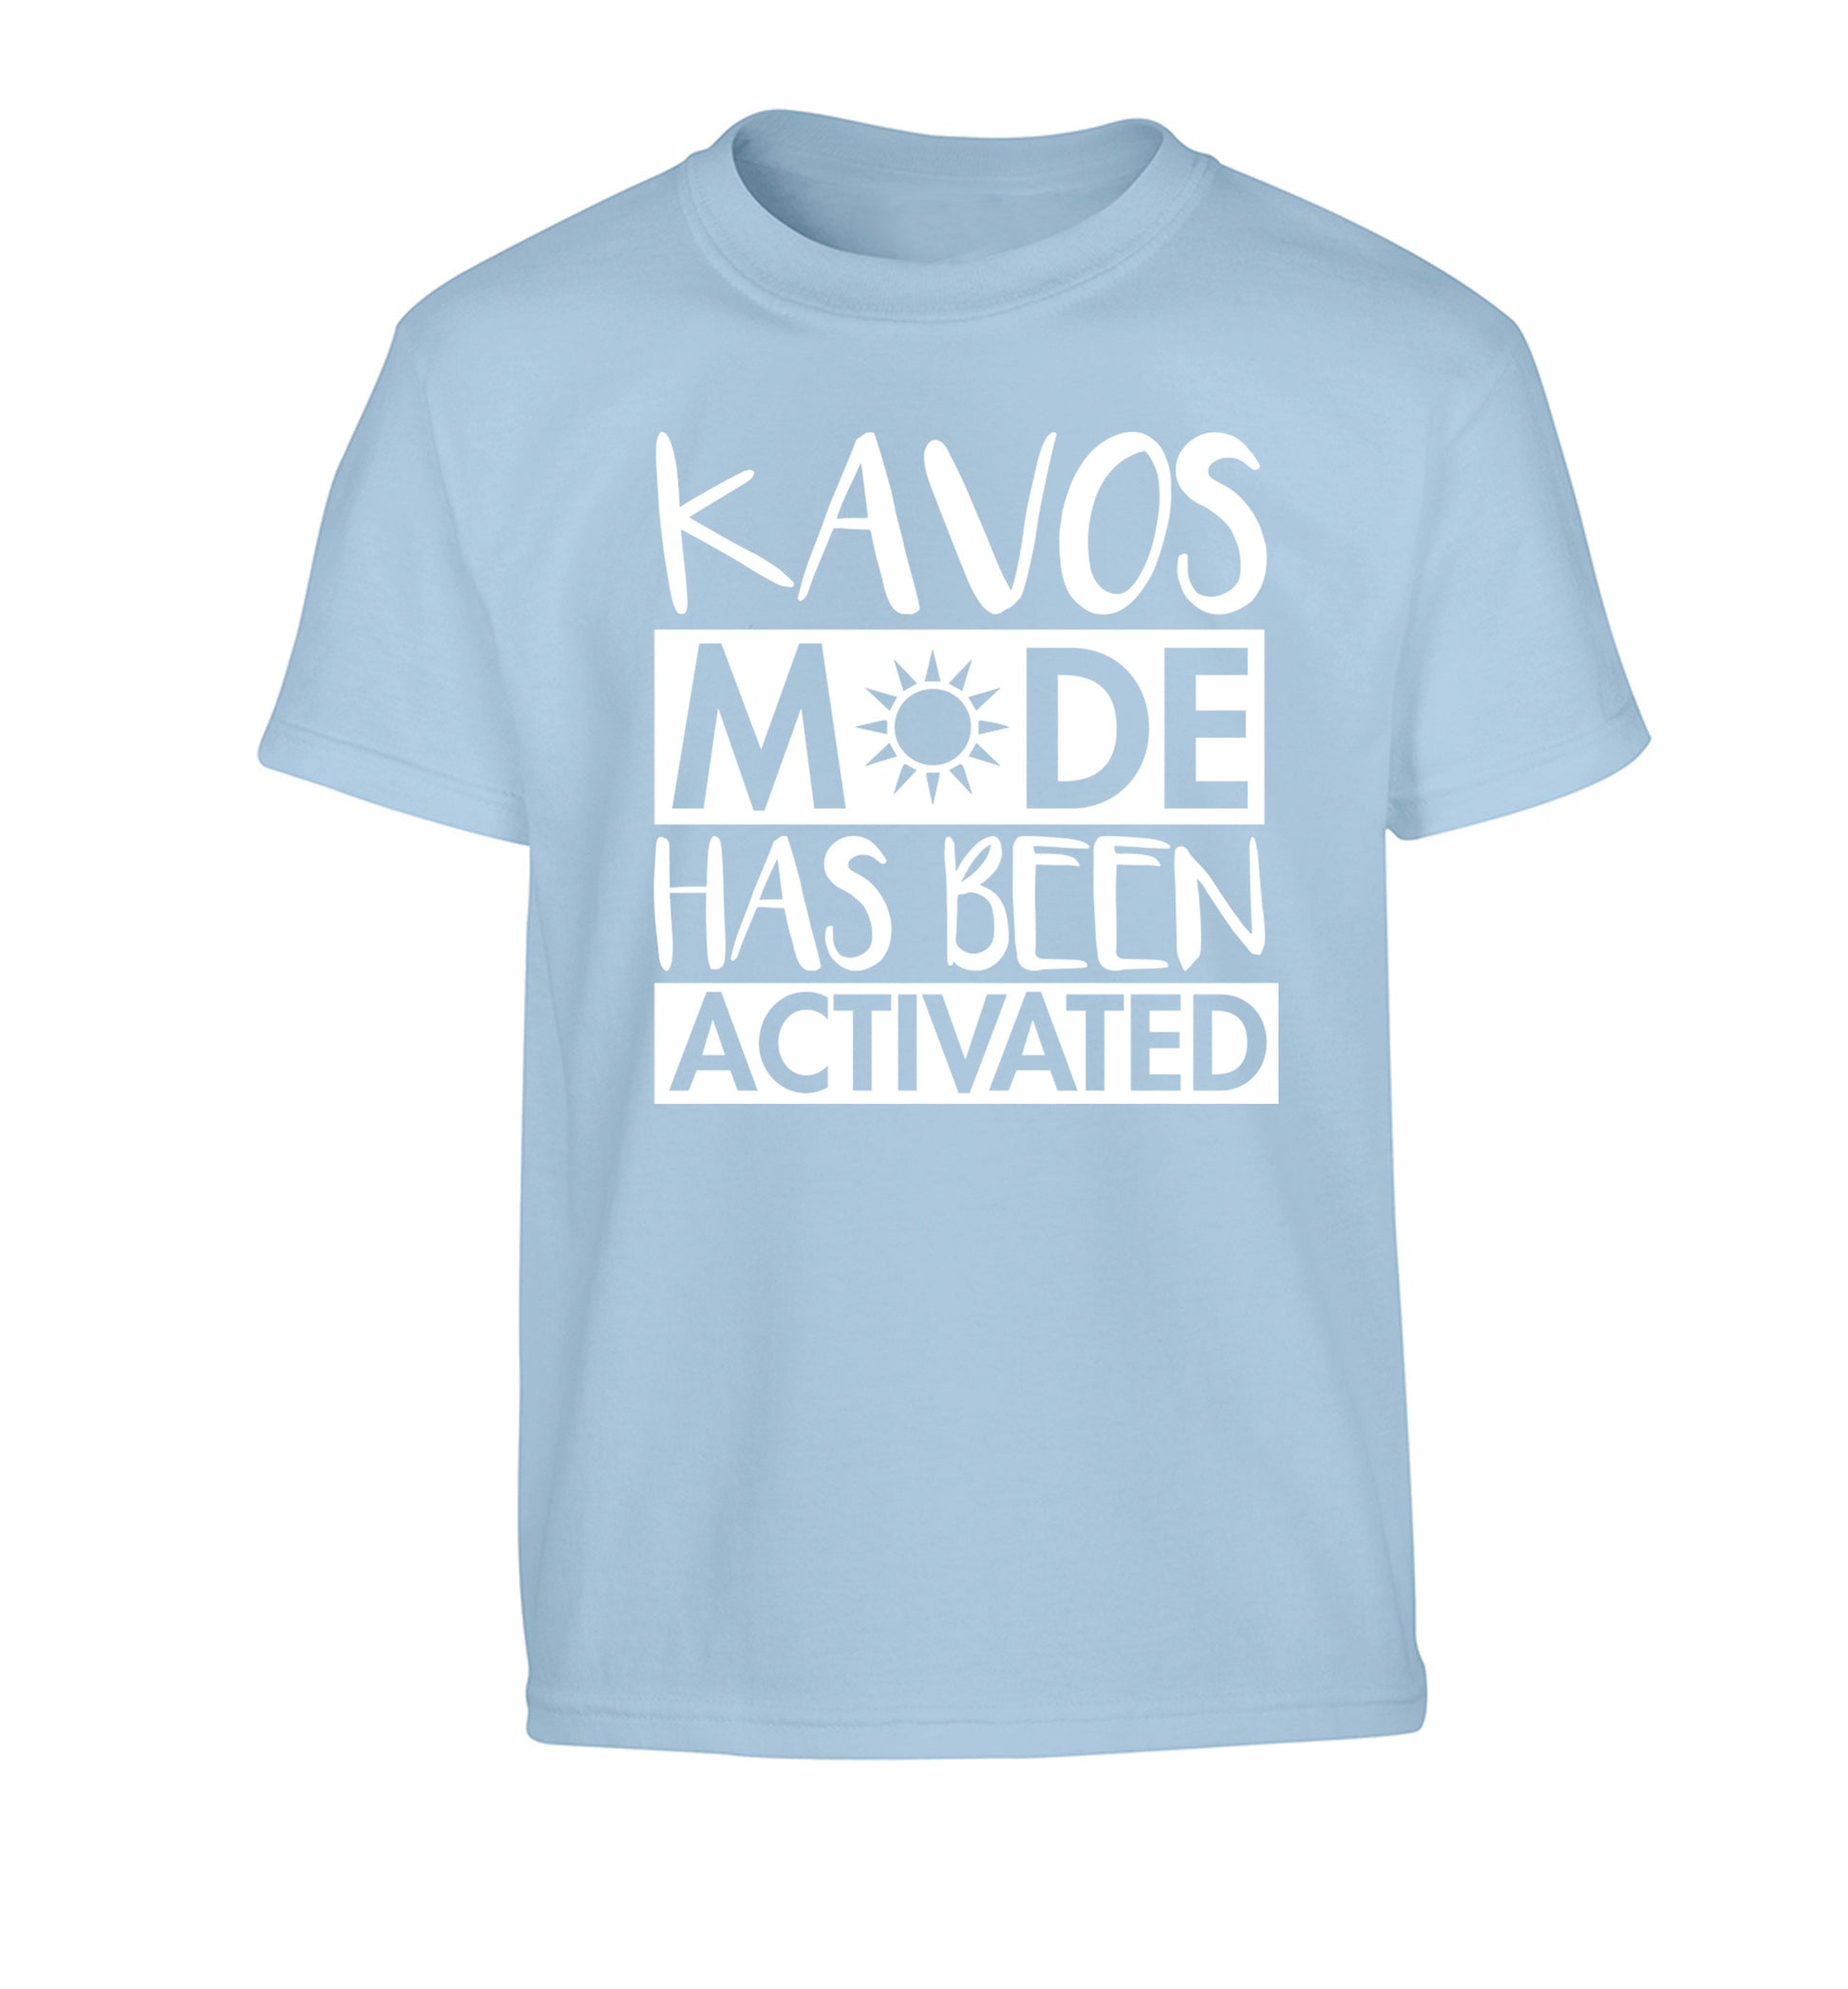 Kavos mode has been activated Children's light blue Tshirt 12-14 Years